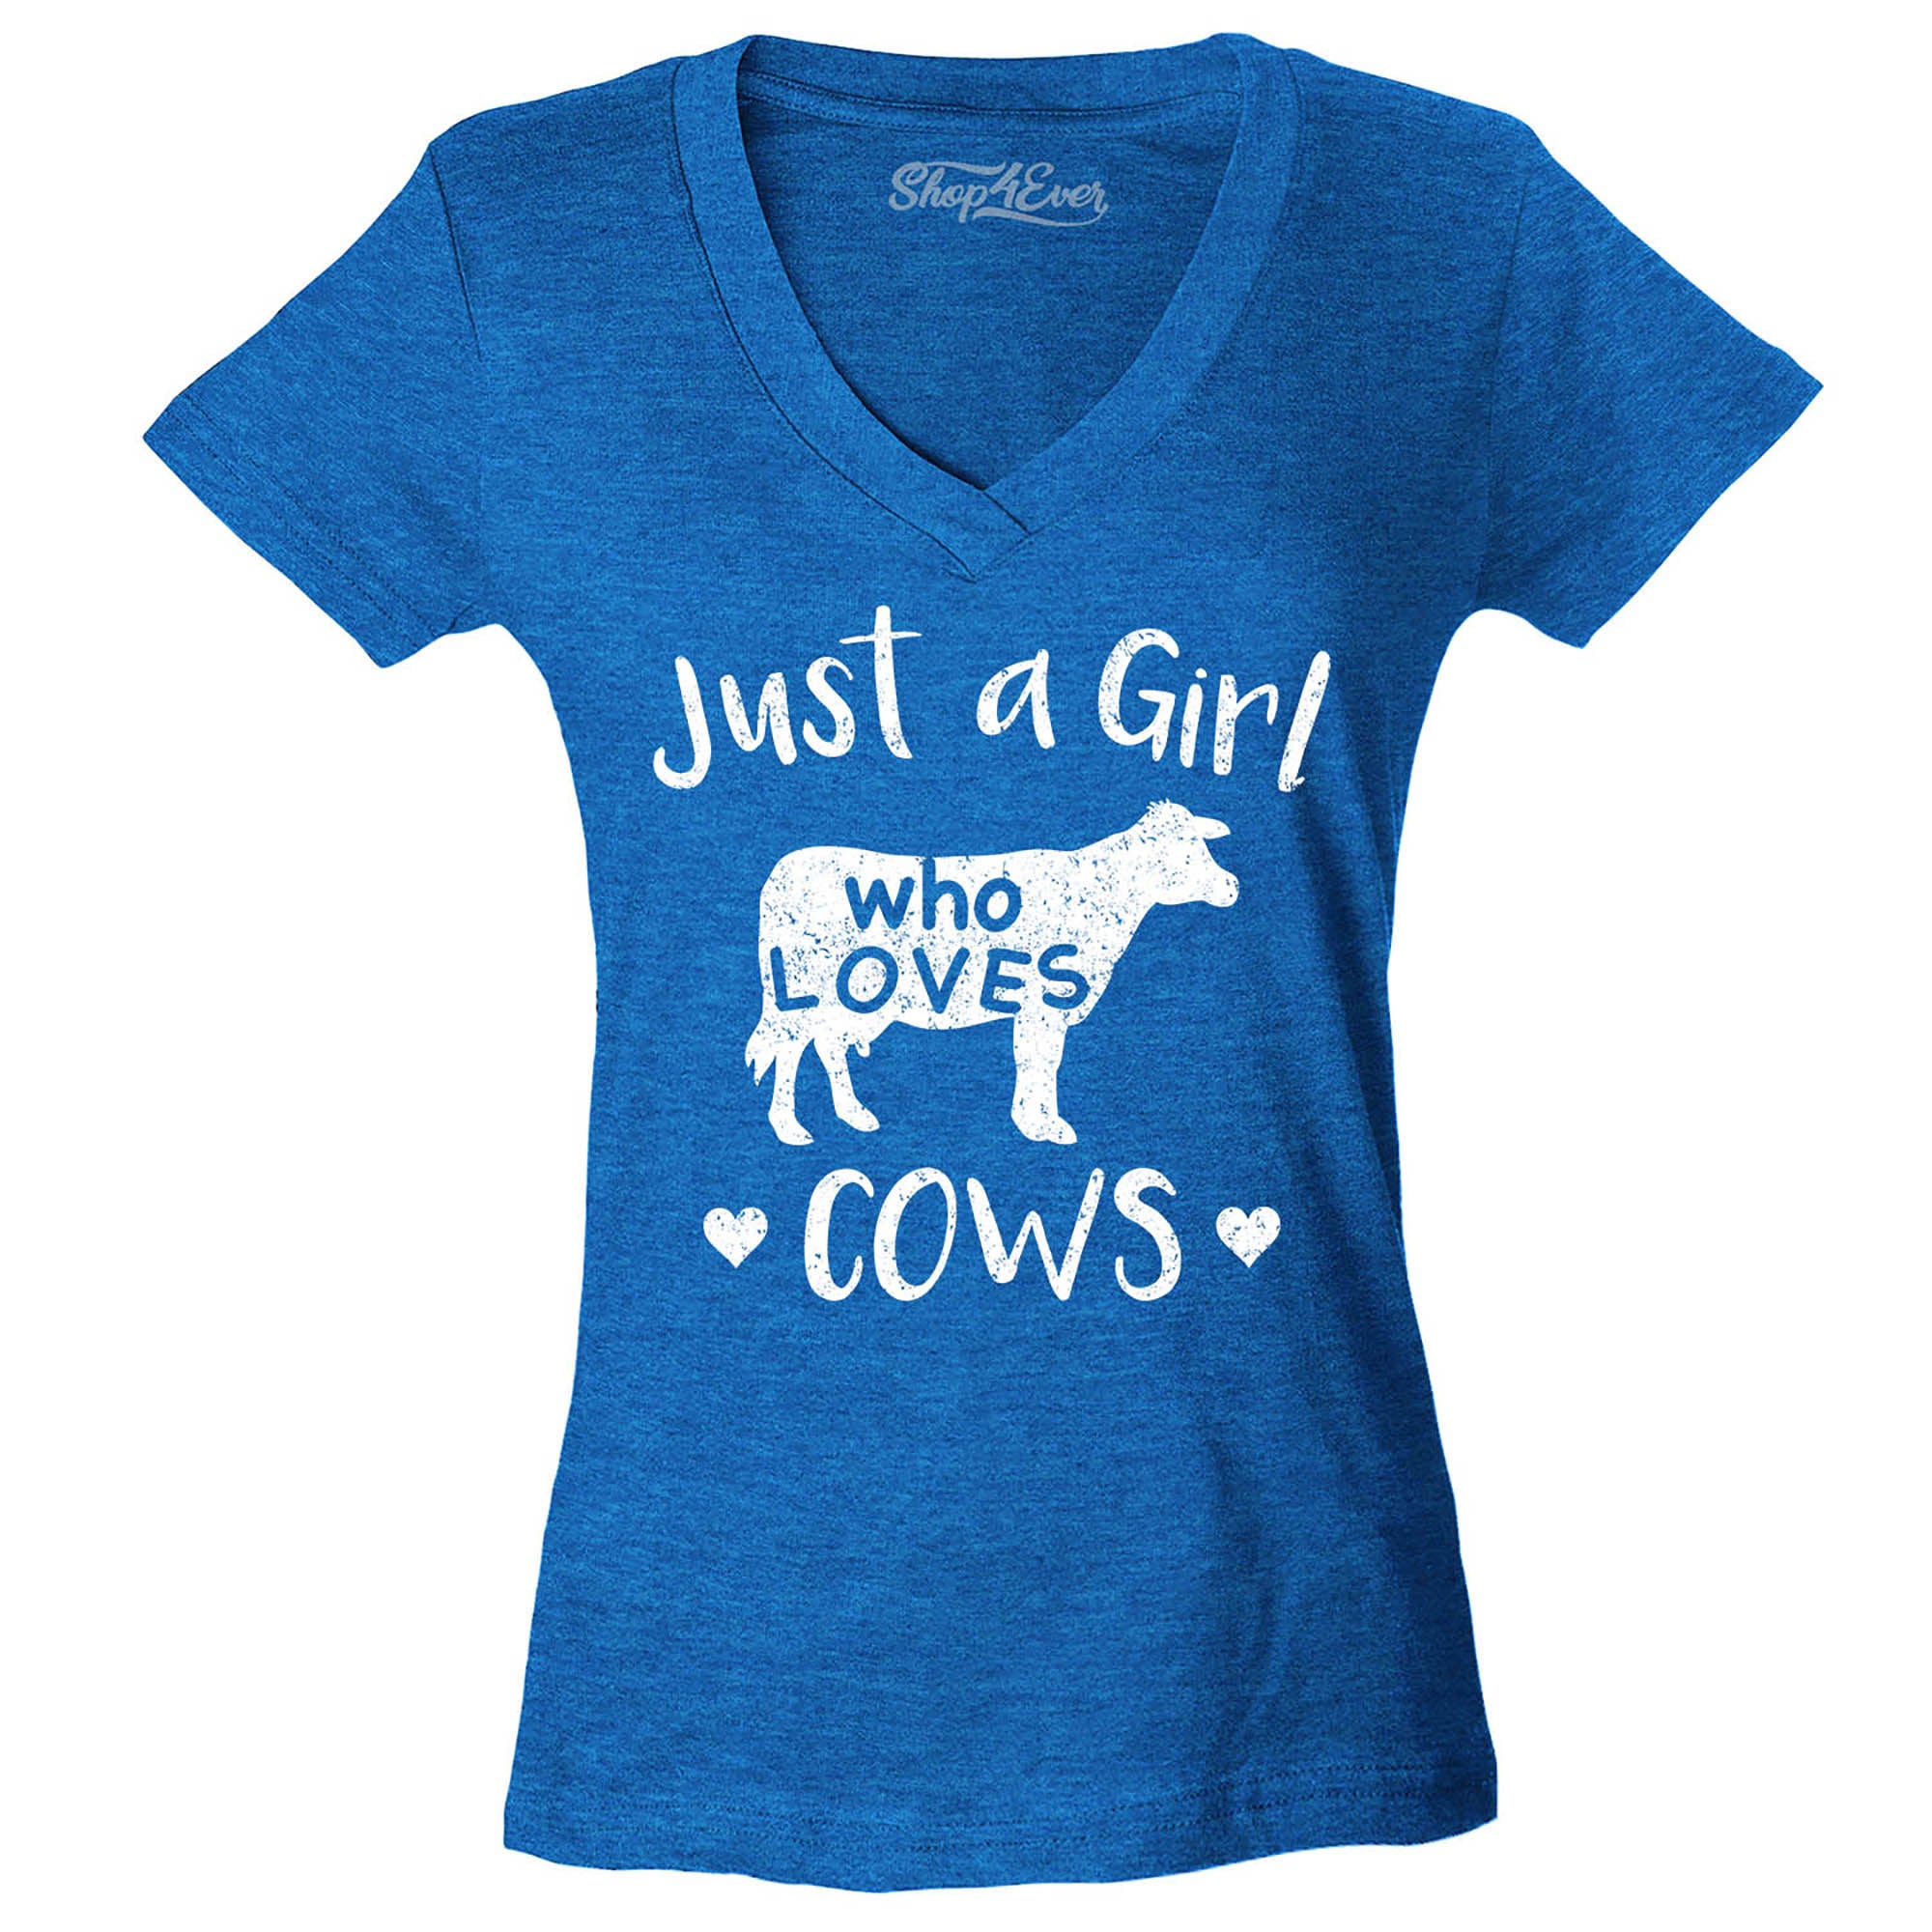 Just A Girl Who Loves Cows Women's V-Neck T-Shirt Slim Fit